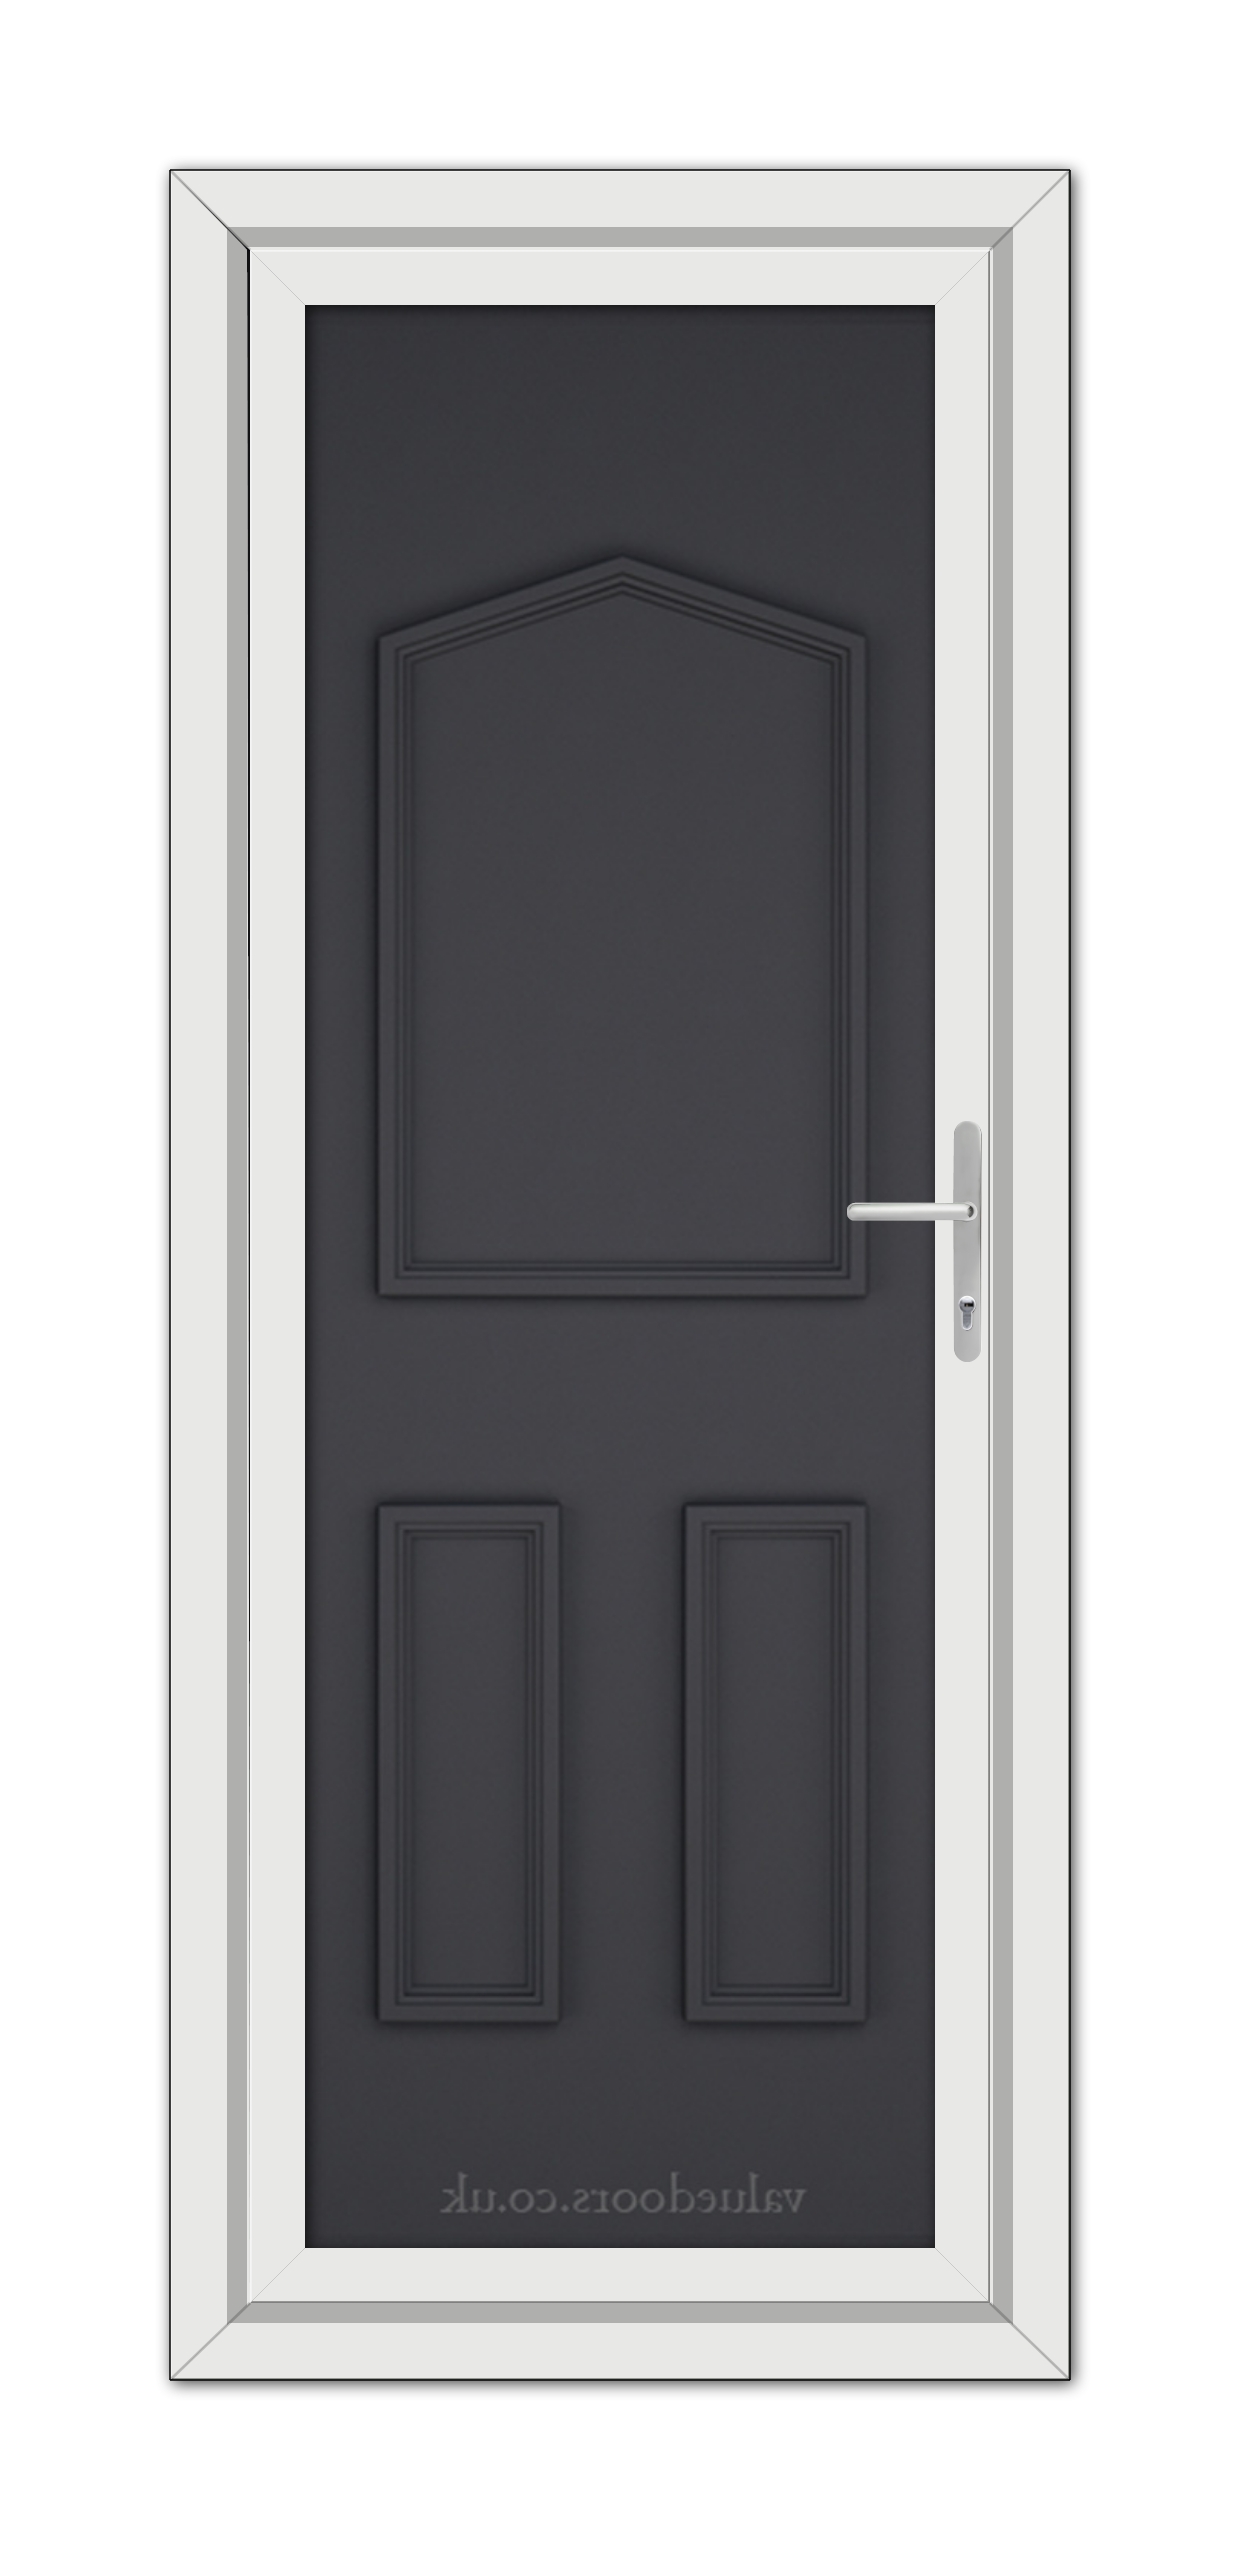 A modern, Grey Oxford Solid uPVC Door with a metallic handle, framed by a white doorframe, viewed from the front.